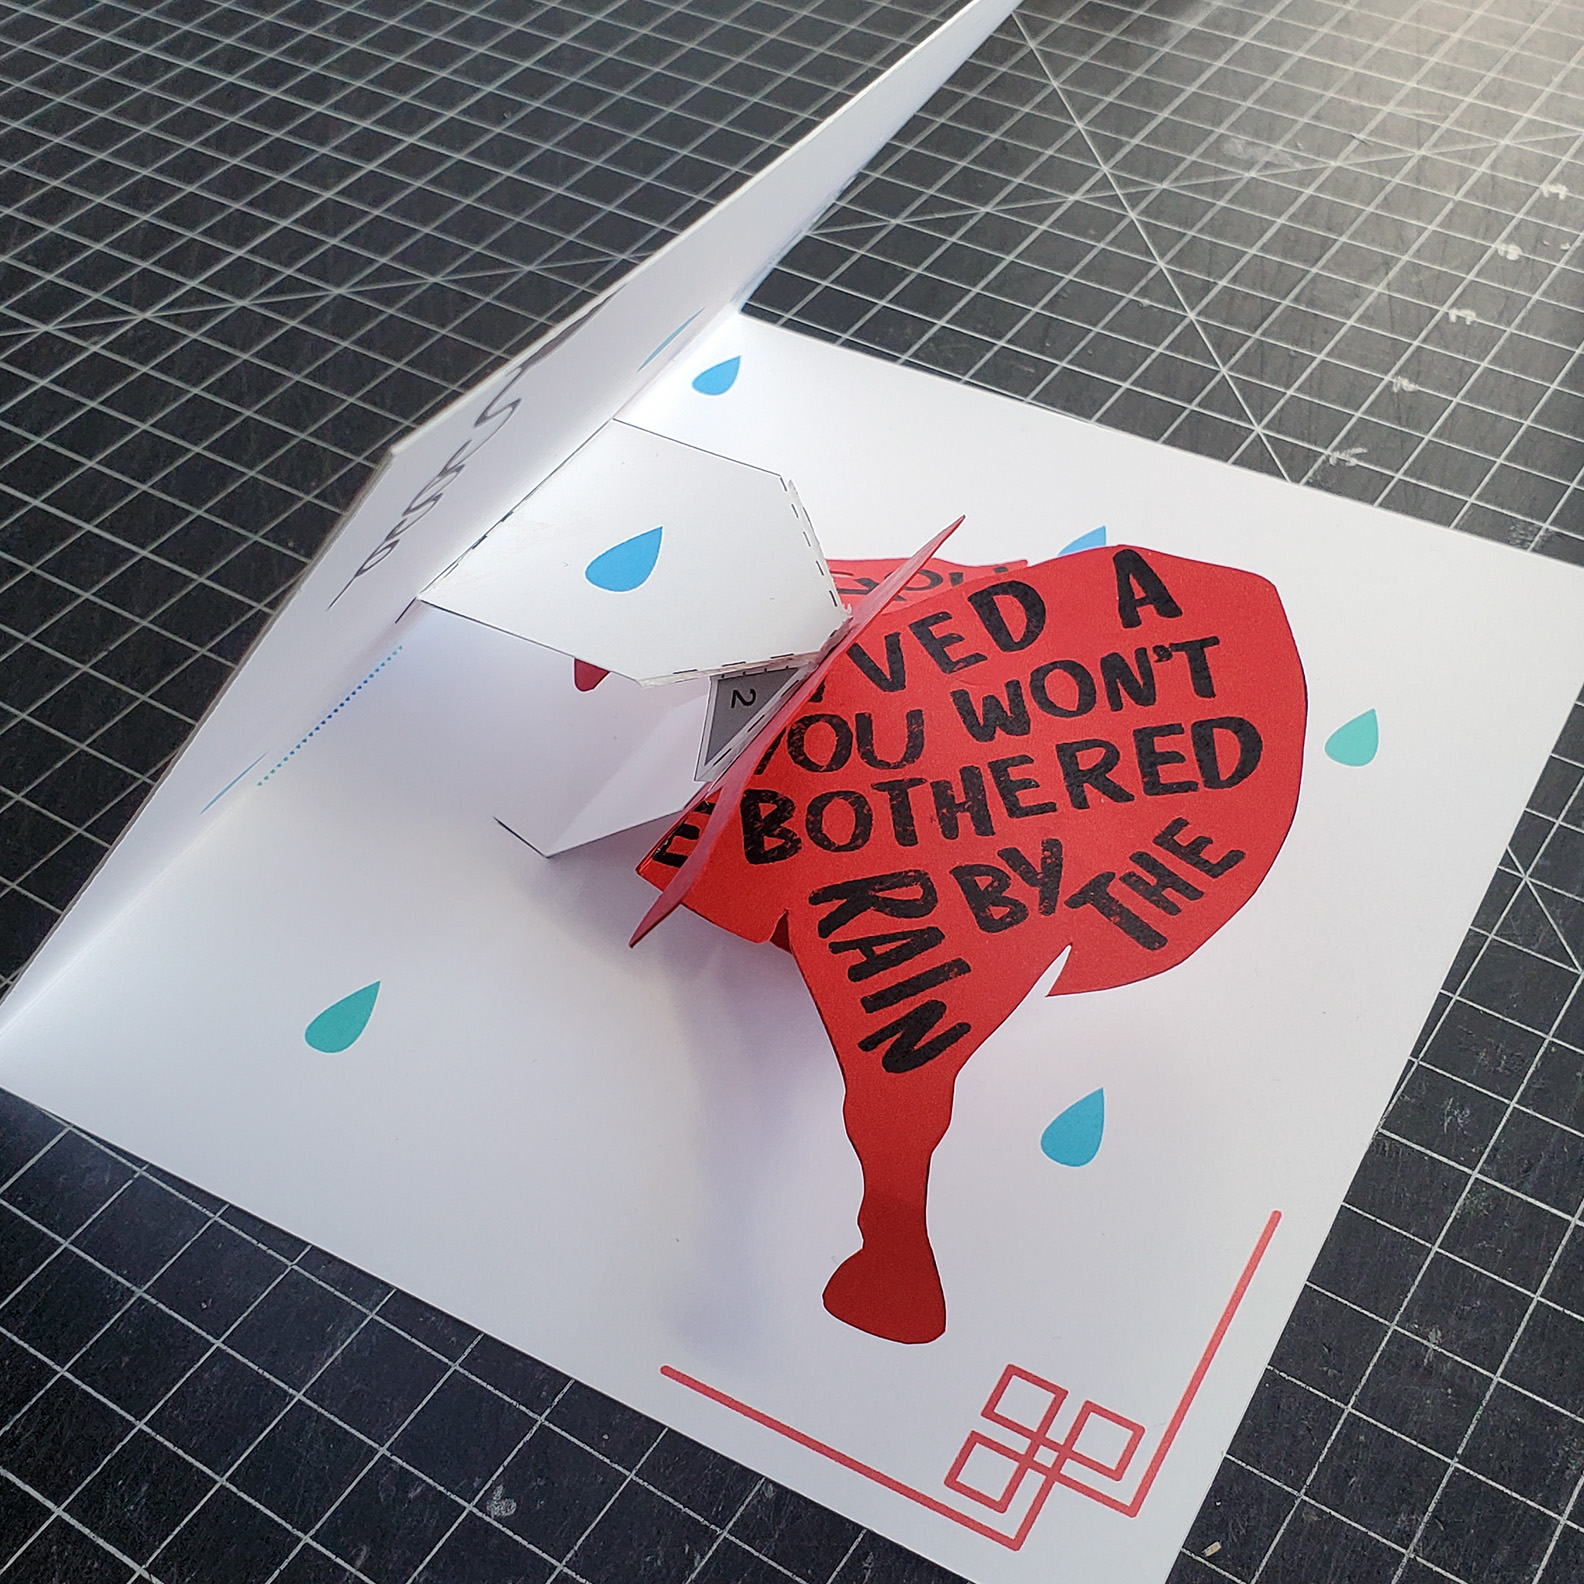 A year of the Ox pop-up card is halfway closed. There is half of a red Ox with words written within the border.